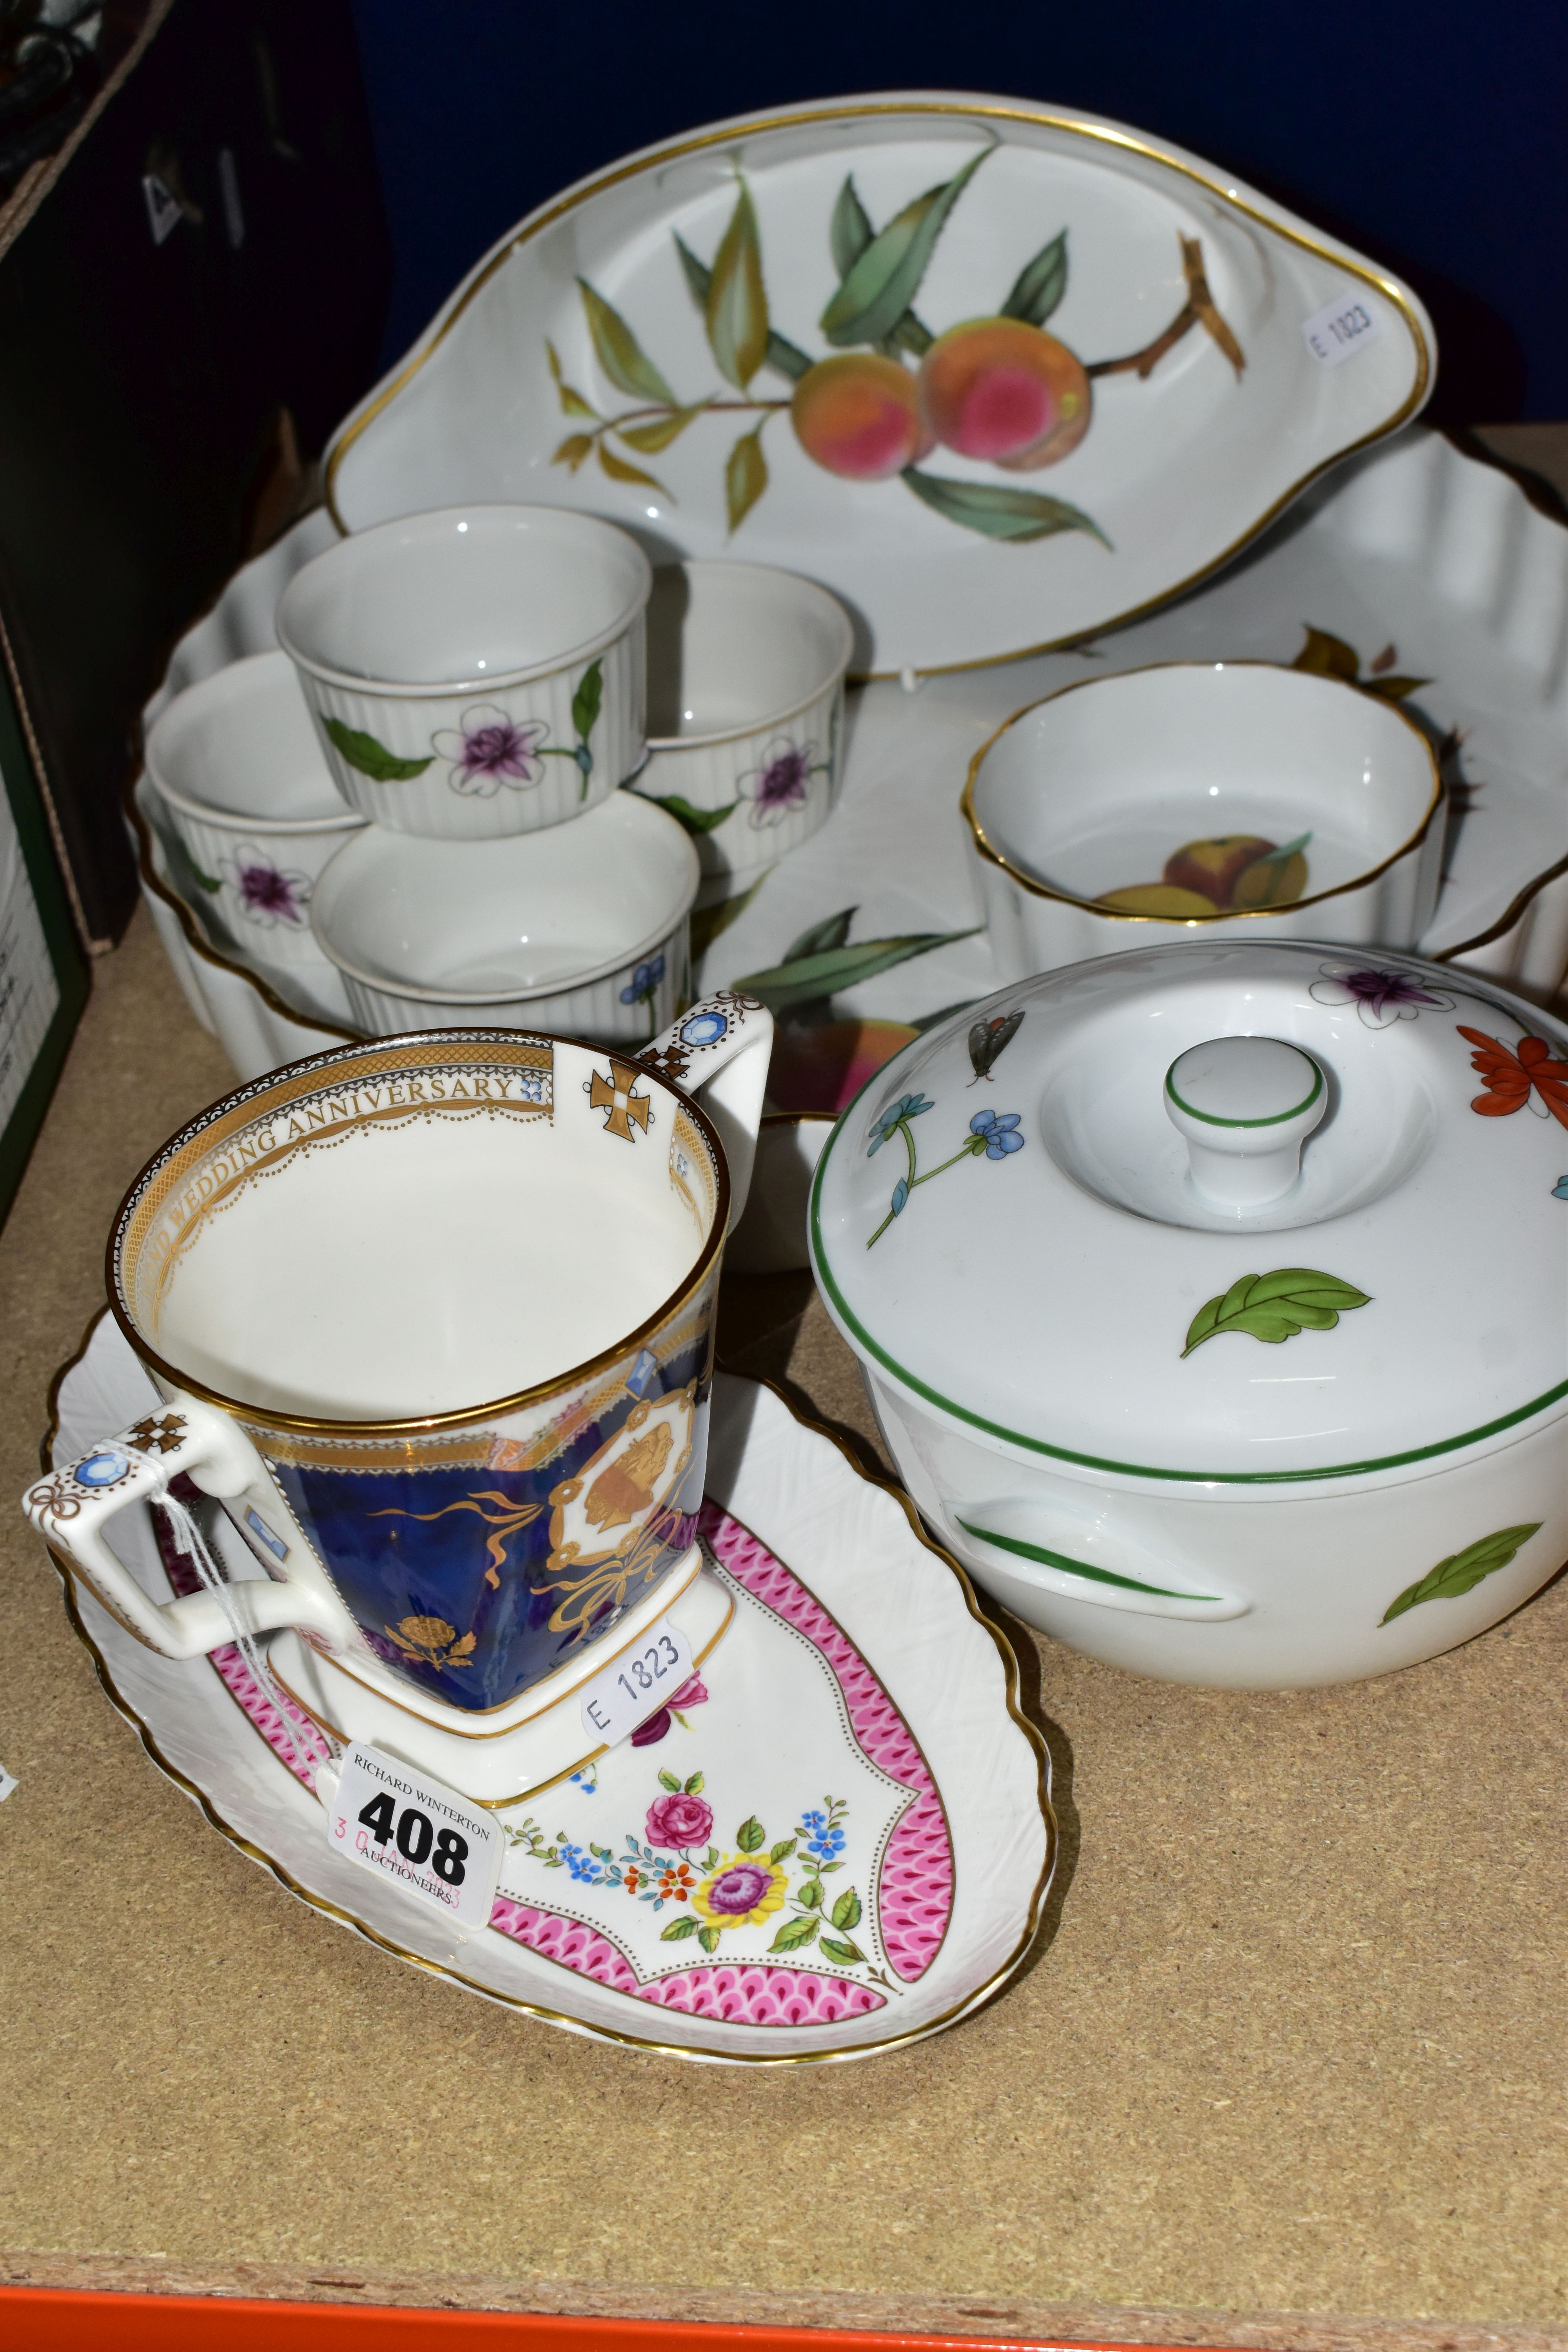 A GROUP OF ROYAL WORCESTER CERAMICS, comprising an 'Astley' pattern small lidded casserole pot and